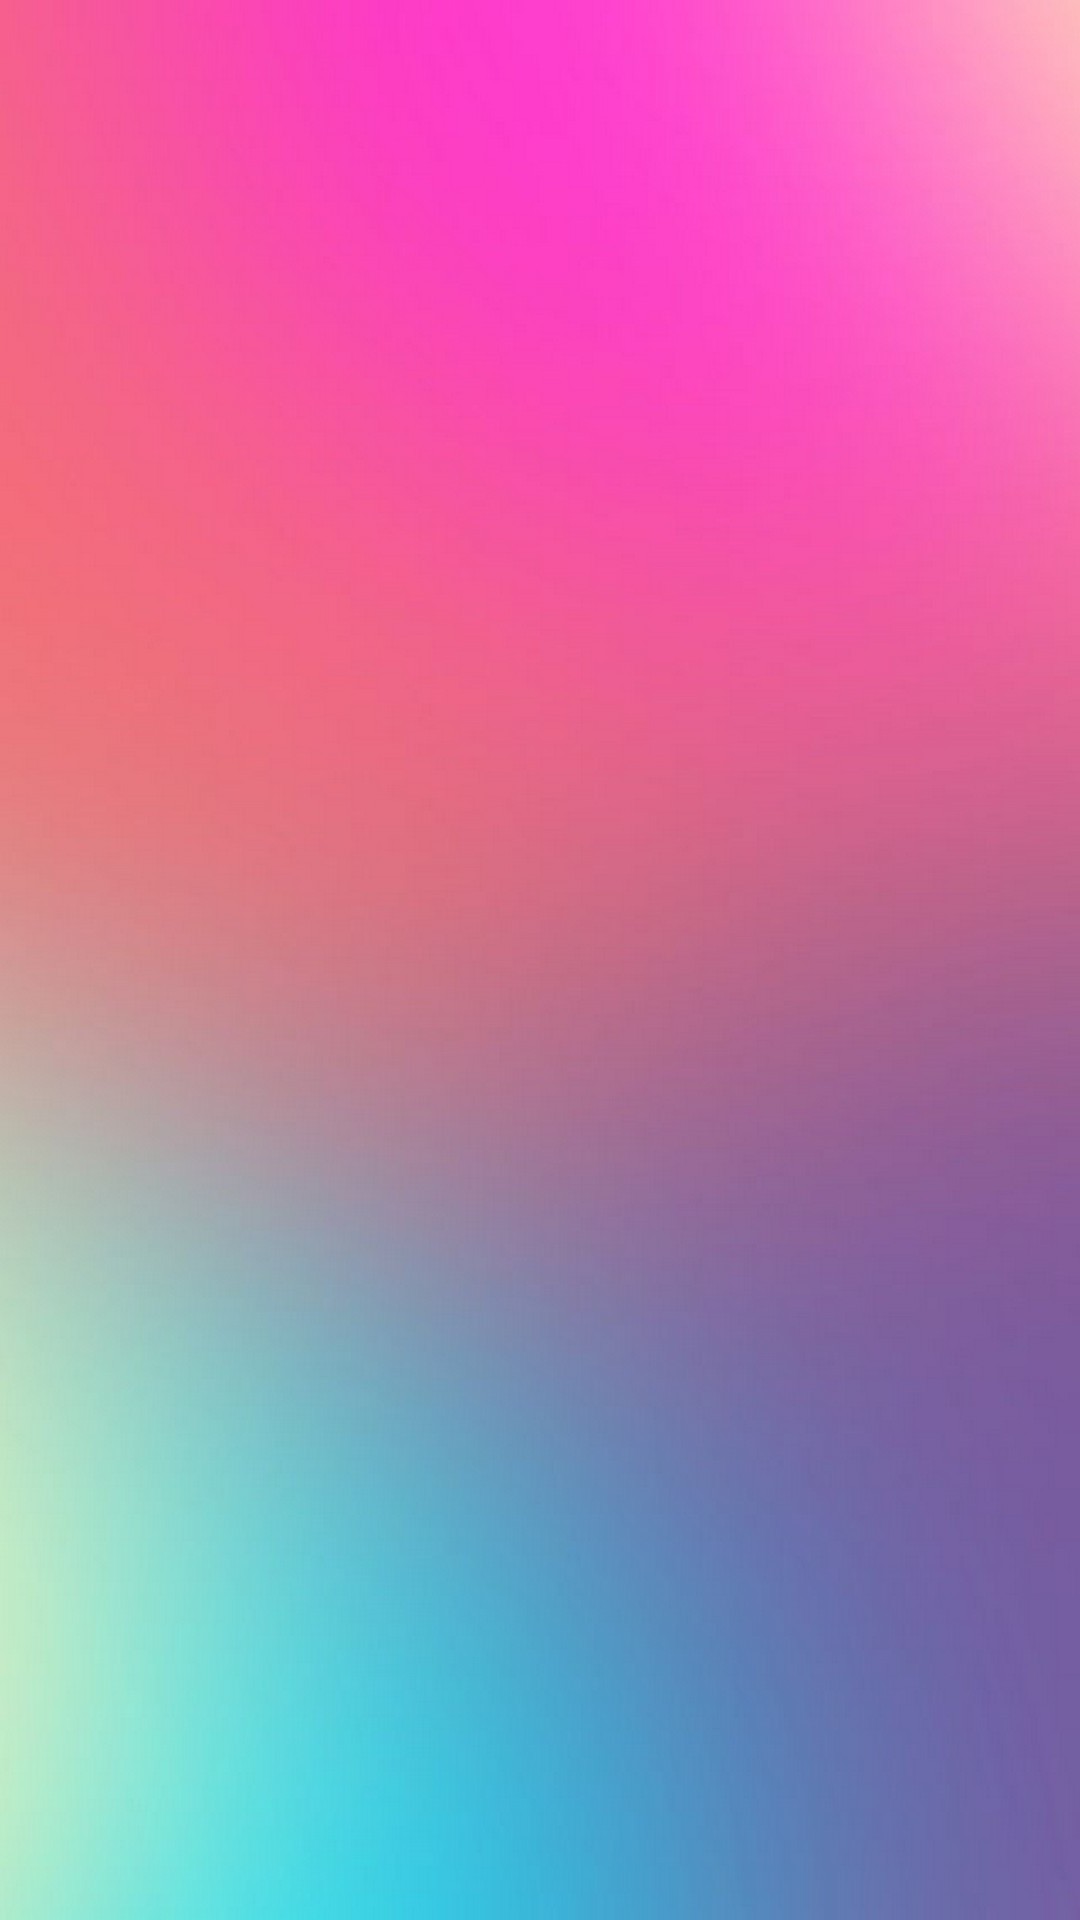 Gradient Backgrounds For Android With high-resolution 1080X1920 pixel. You can use this wallpaper for your Android backgrounds, Tablet, Samsung Screensavers, Mobile Phone Lock Screen and another Smartphones device